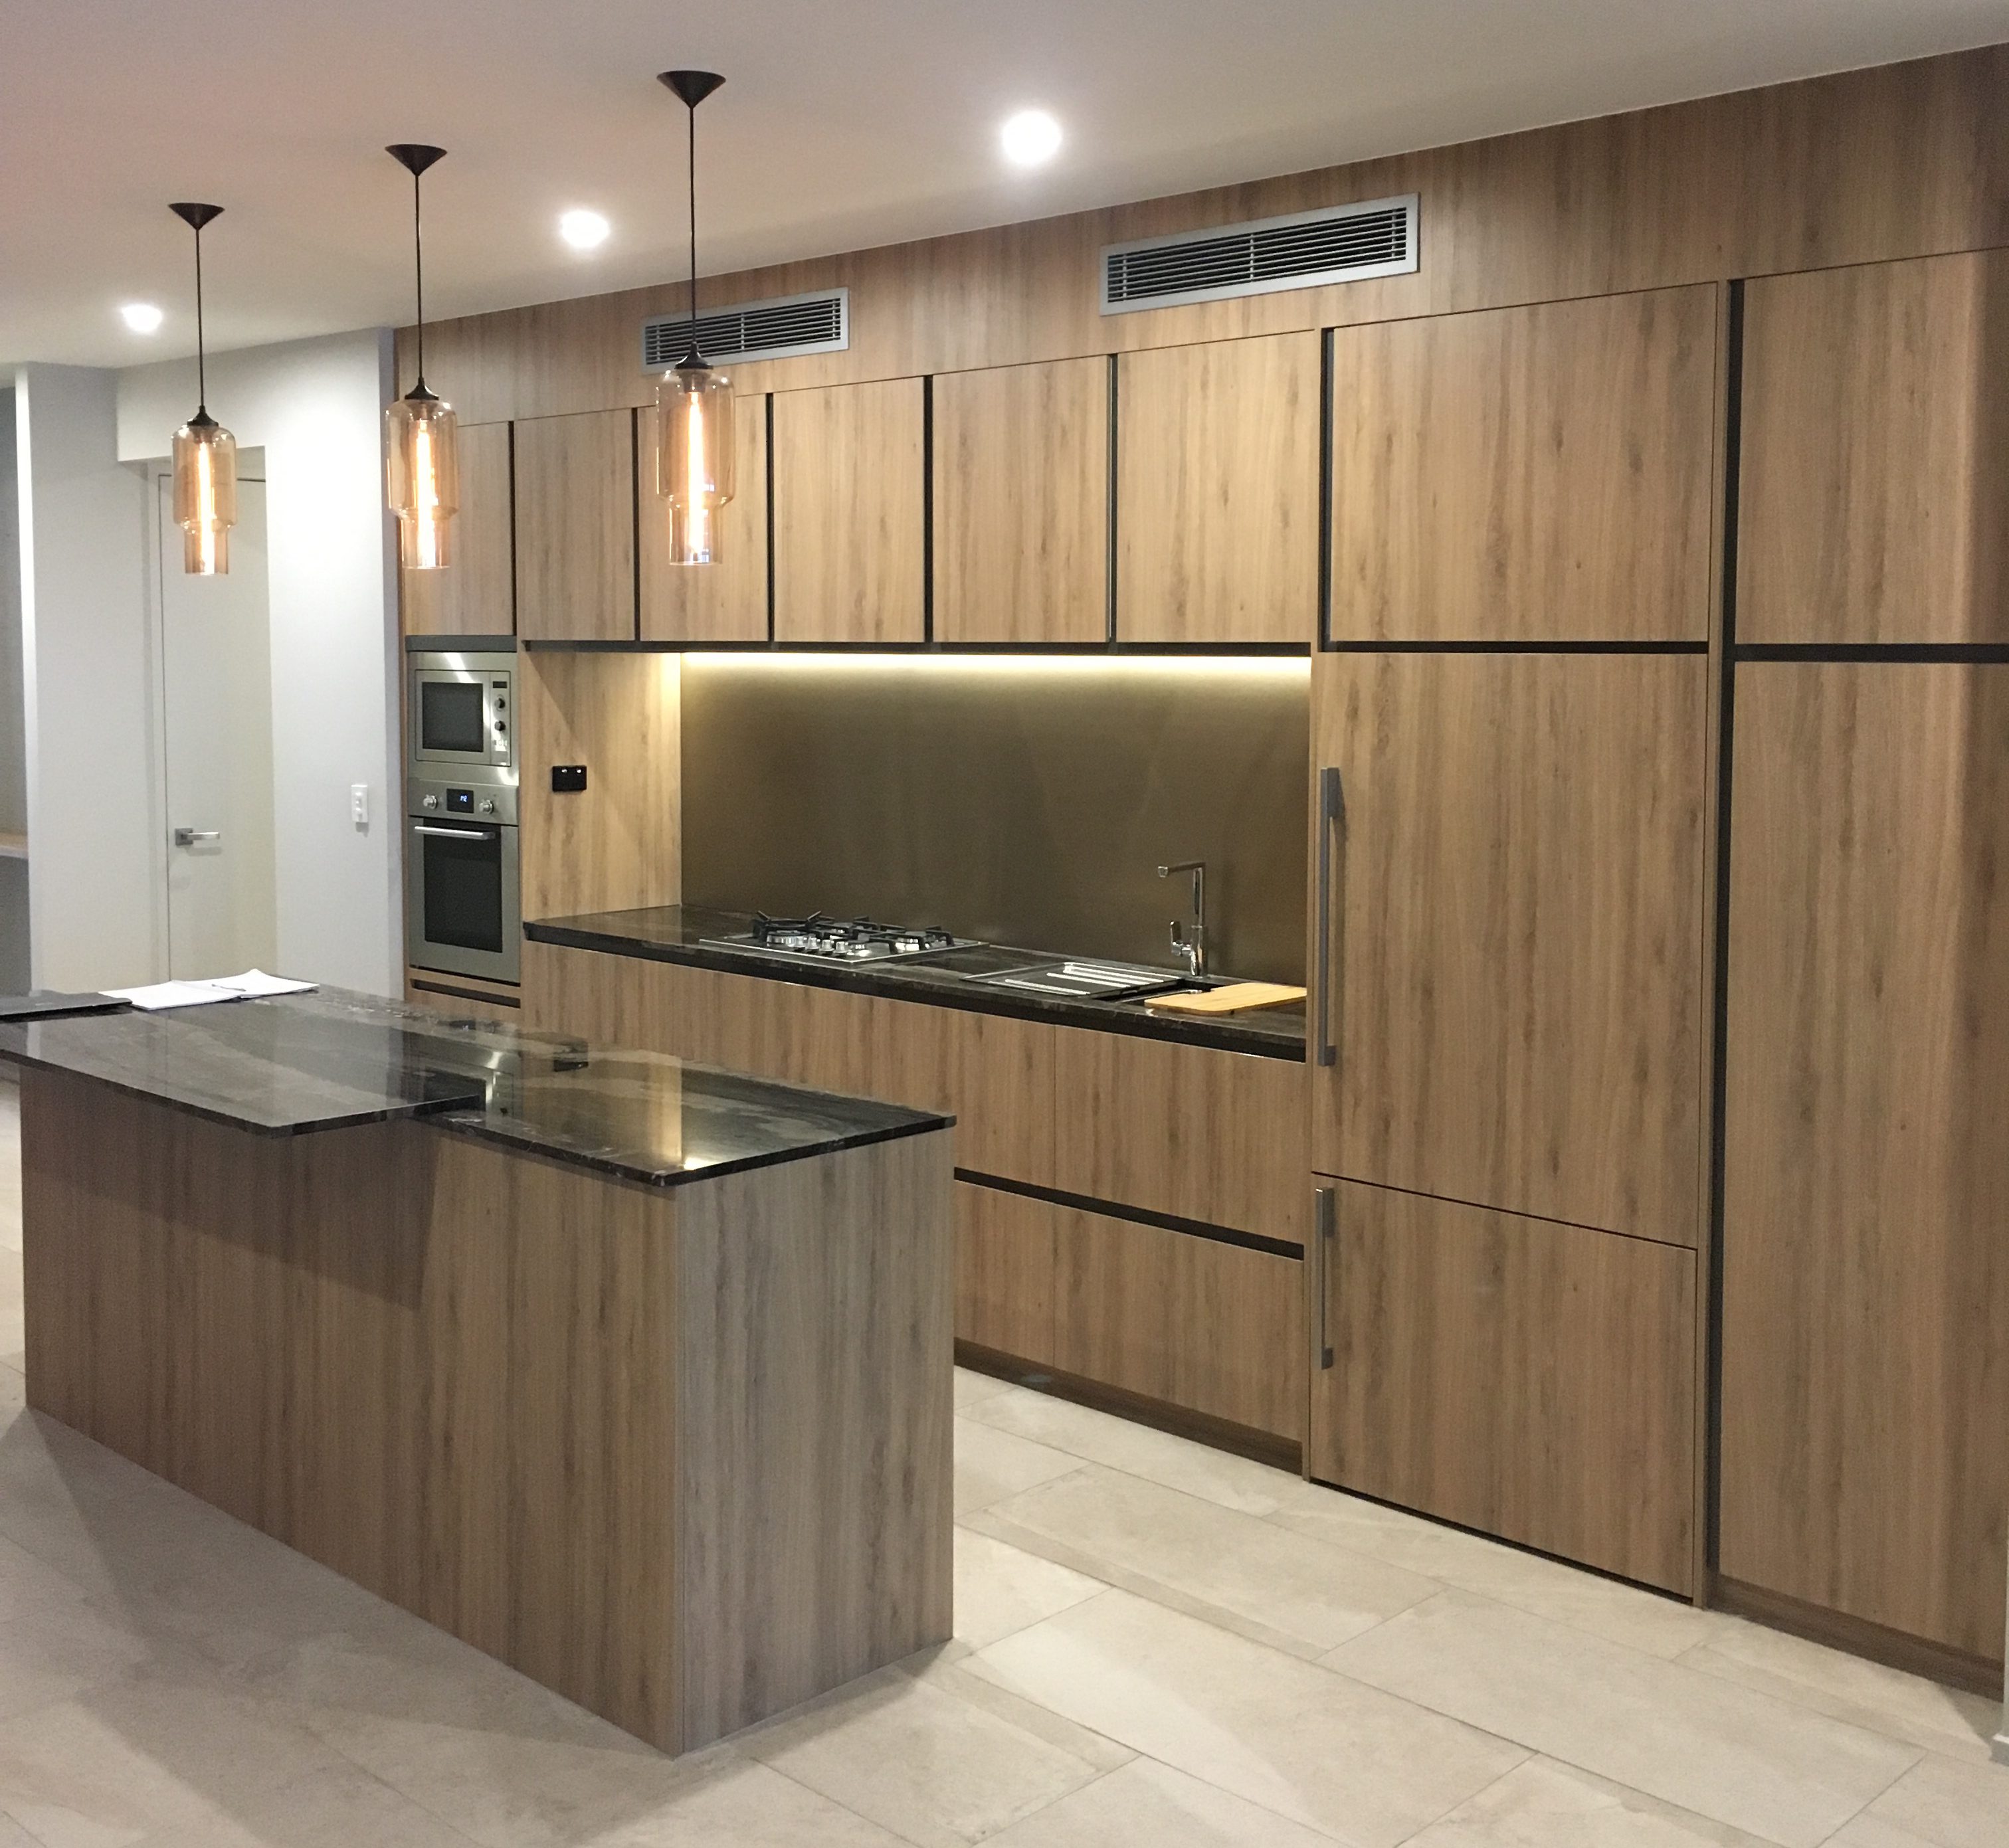 Photo of the display kitchen for La Vida Green - a fantastic example of a usable kitchen.